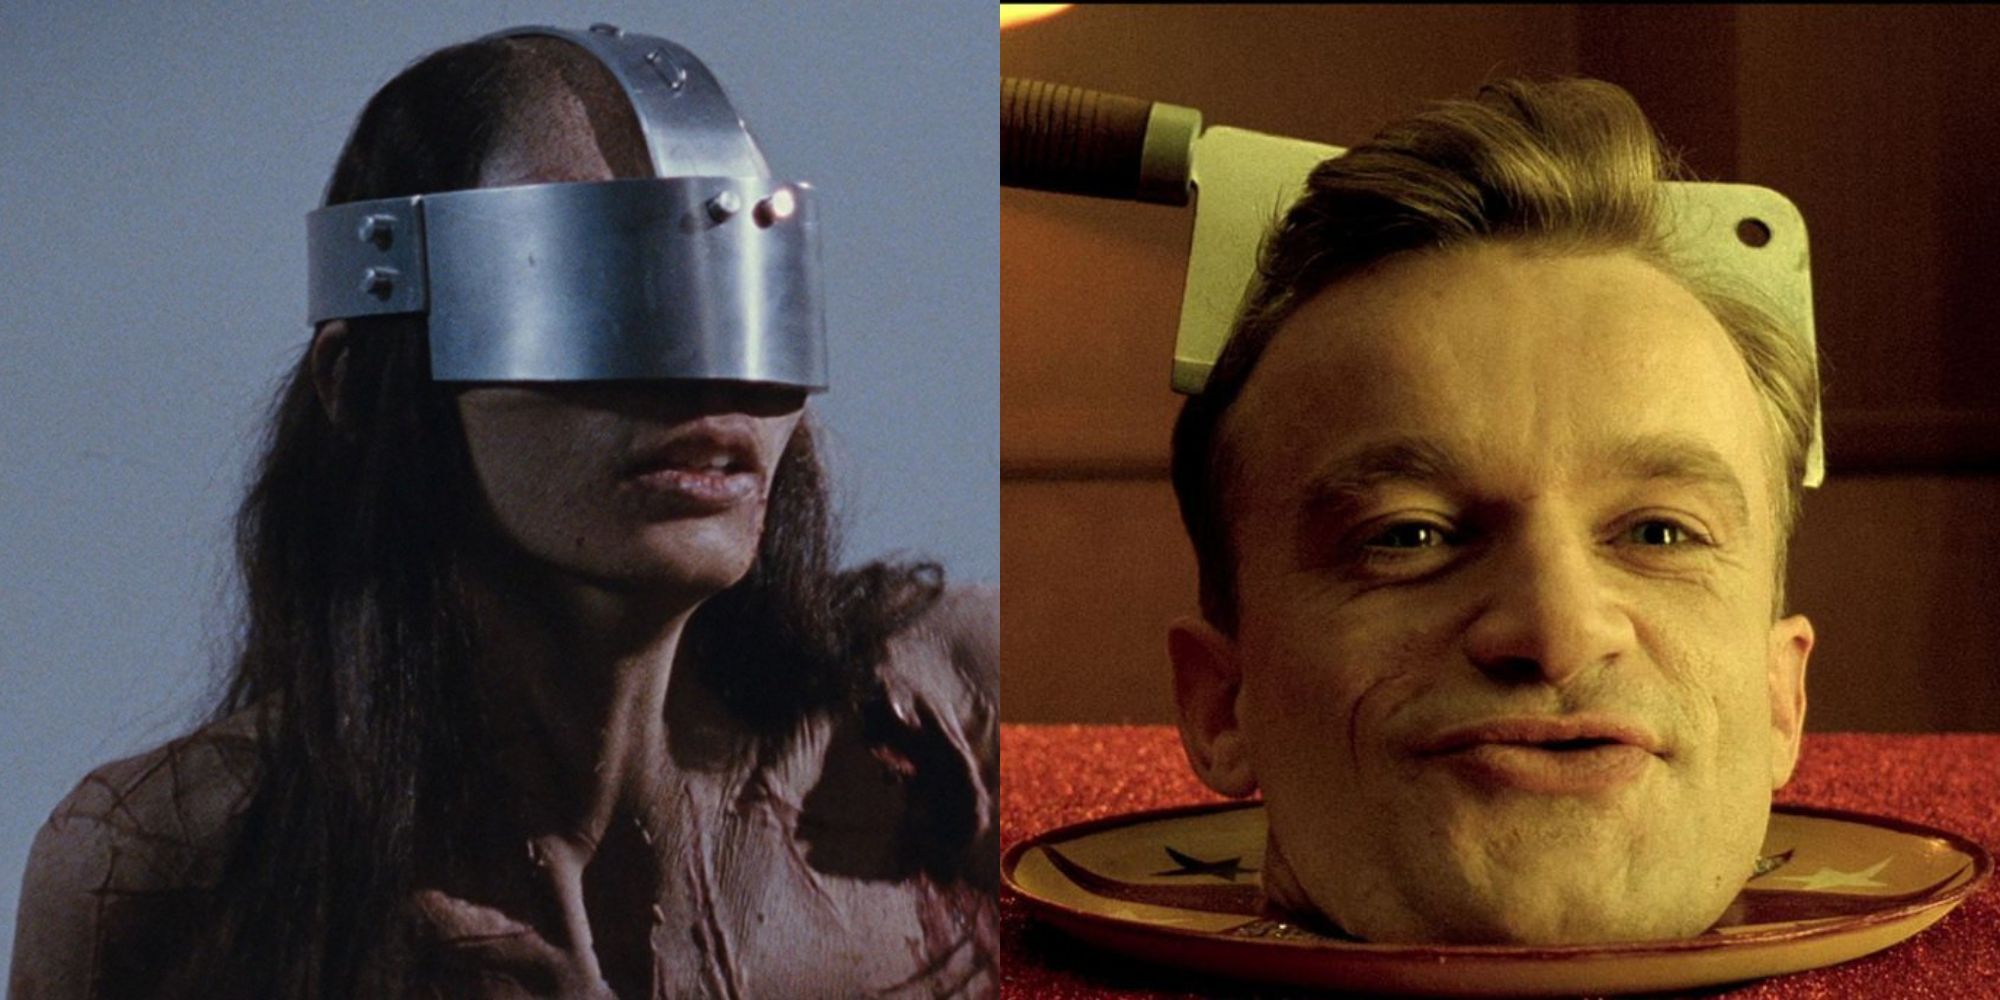 A horribly brutalised and emaciated woman with a metal capped to her head covering her eyes in Martyrs on the left; A head placed on a plate with a butcher's knife sliced onto it in Delicatessen on the right